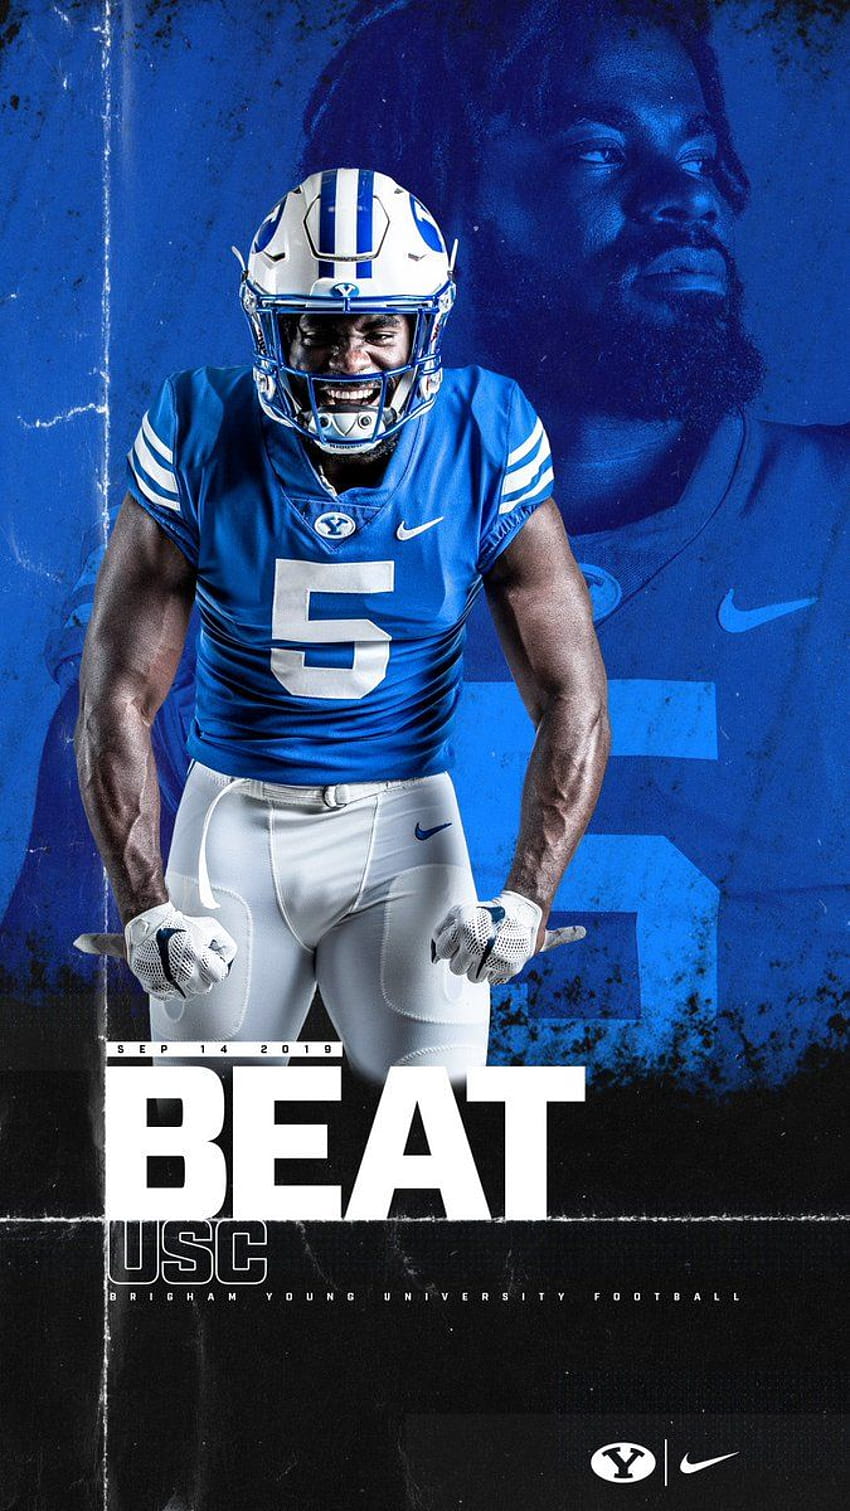 BYU FOOTBALL on Twitter 𝐍𝐄𝐖 𝐖𝐀𝐋𝐋𝐏𝐀𝐏𝐄𝐑𝐒 check out this weeks  wallpapers  BYUFOOTBALL  kslsports httpstcoL73fPXEnWg  Twitter